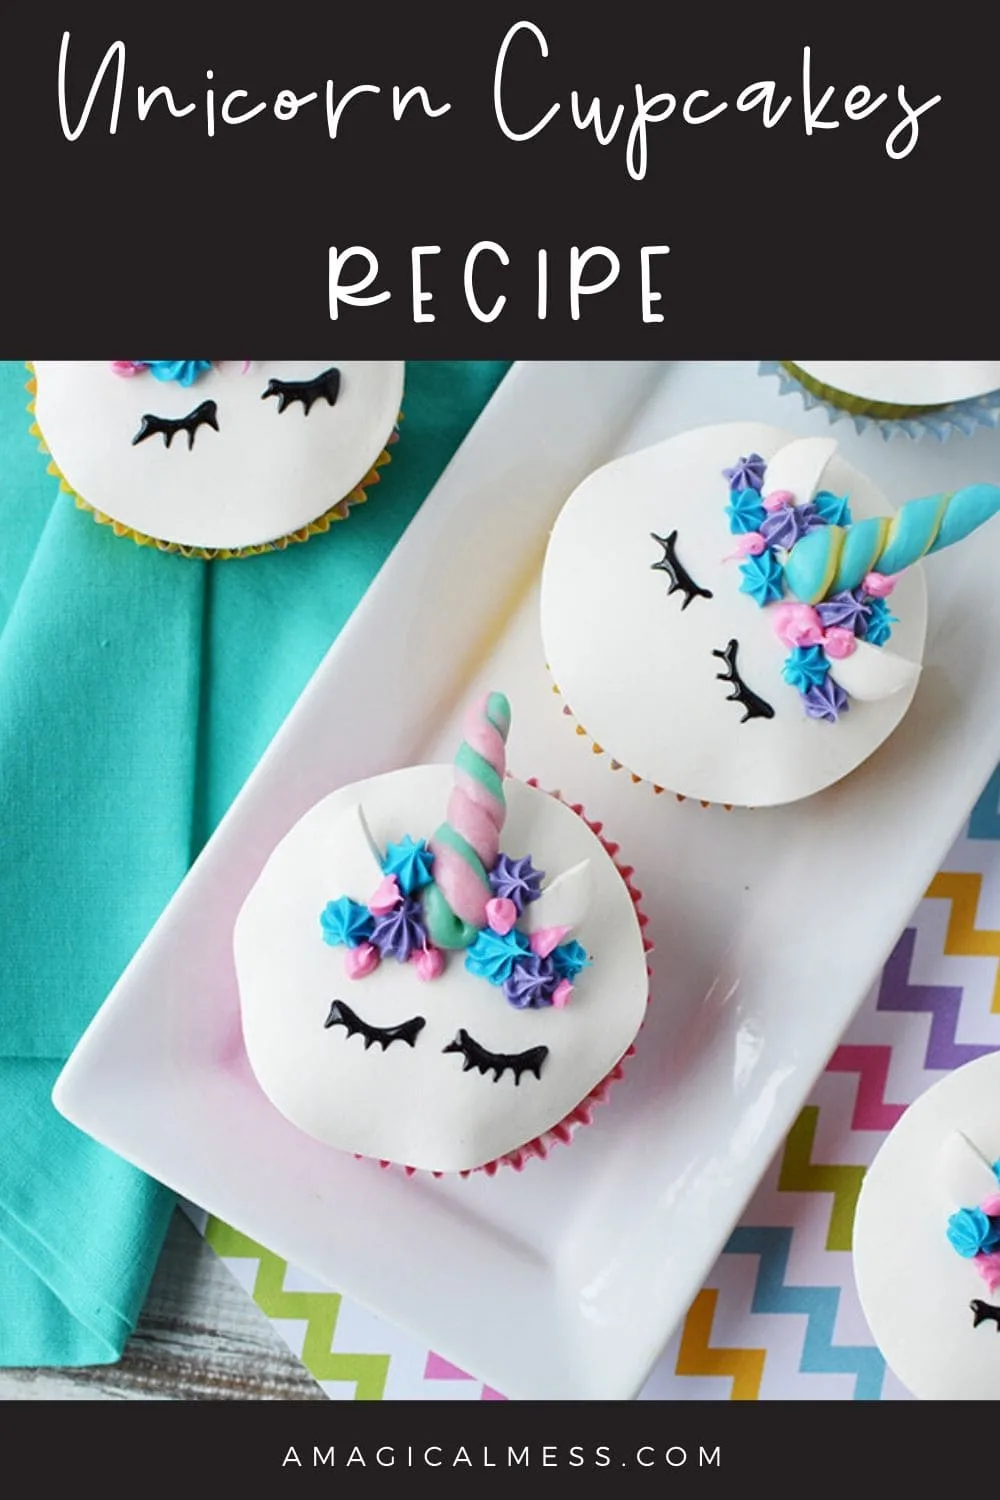 Unicorn cupcakes on a plate